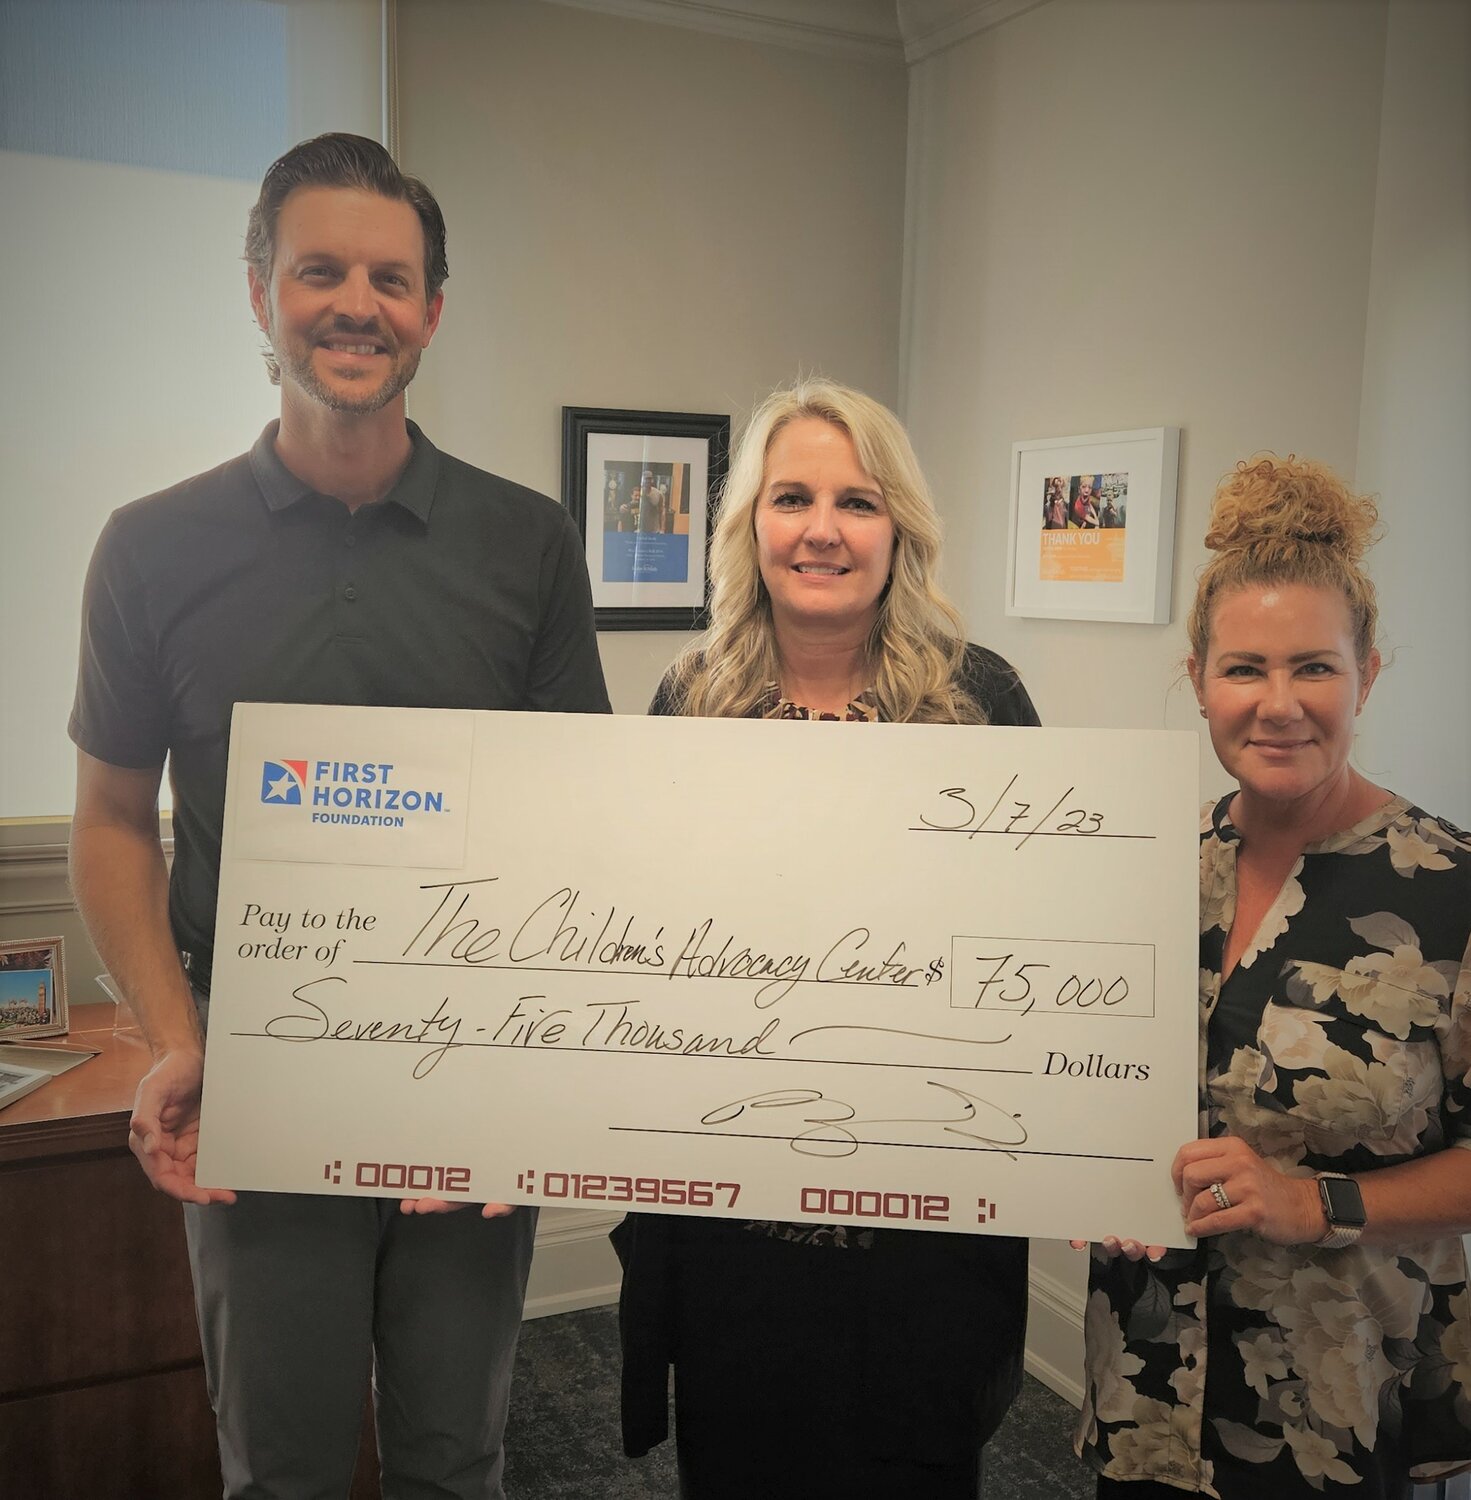 First Horizon Foundation donated $75,000 to the Children’s Advocacy Center.